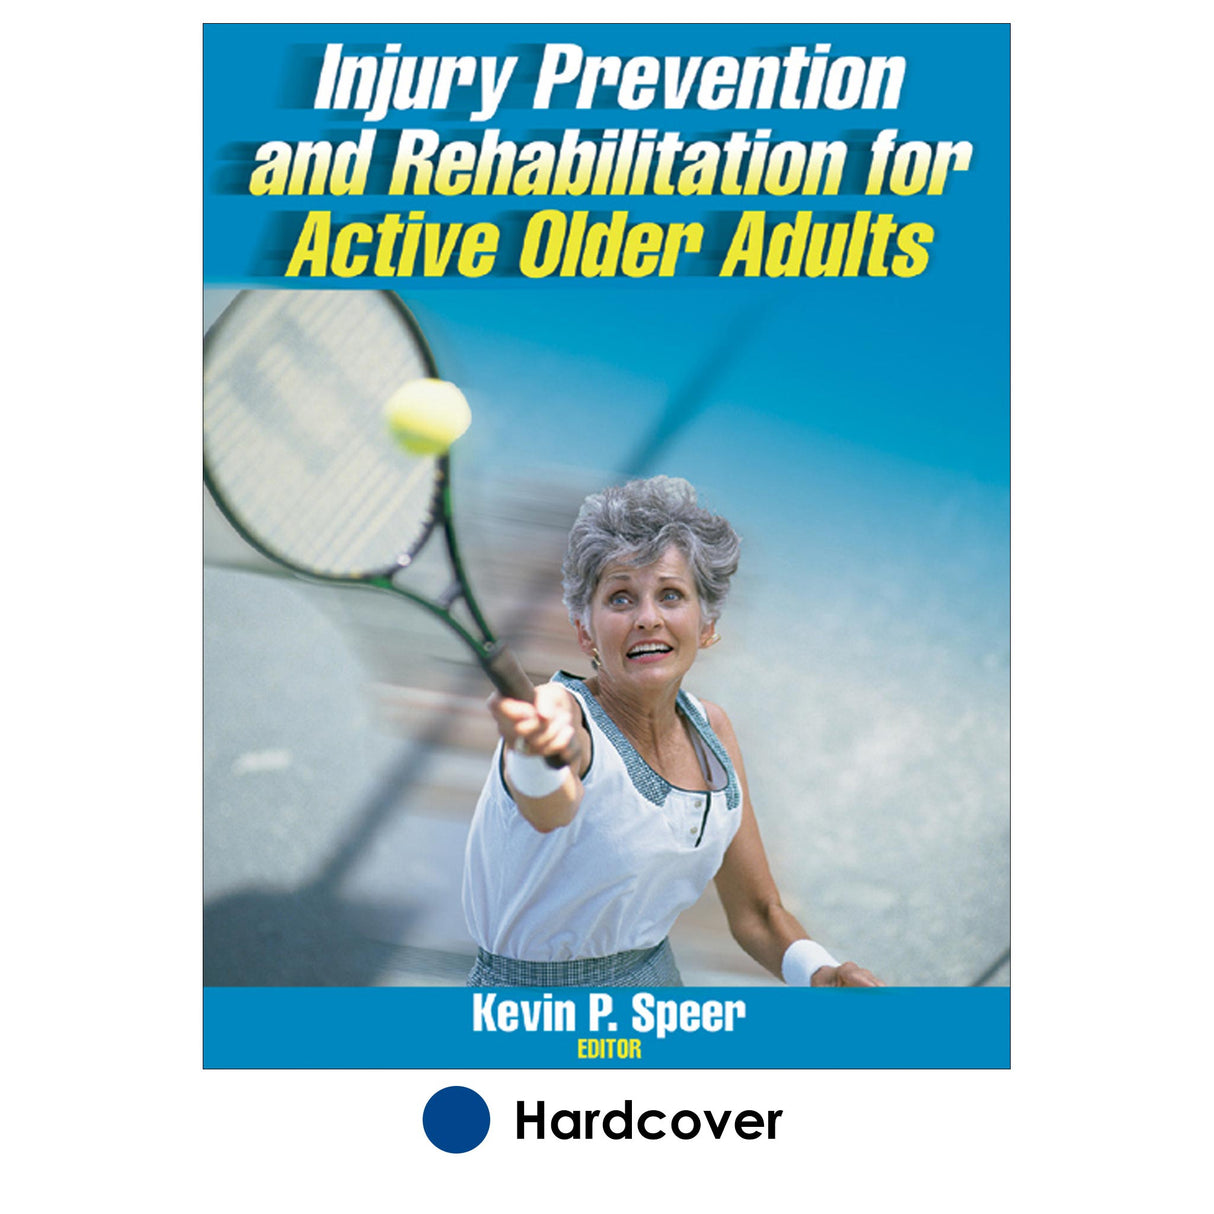 Injury Prevention and Rehabilitation for Active Older Adults